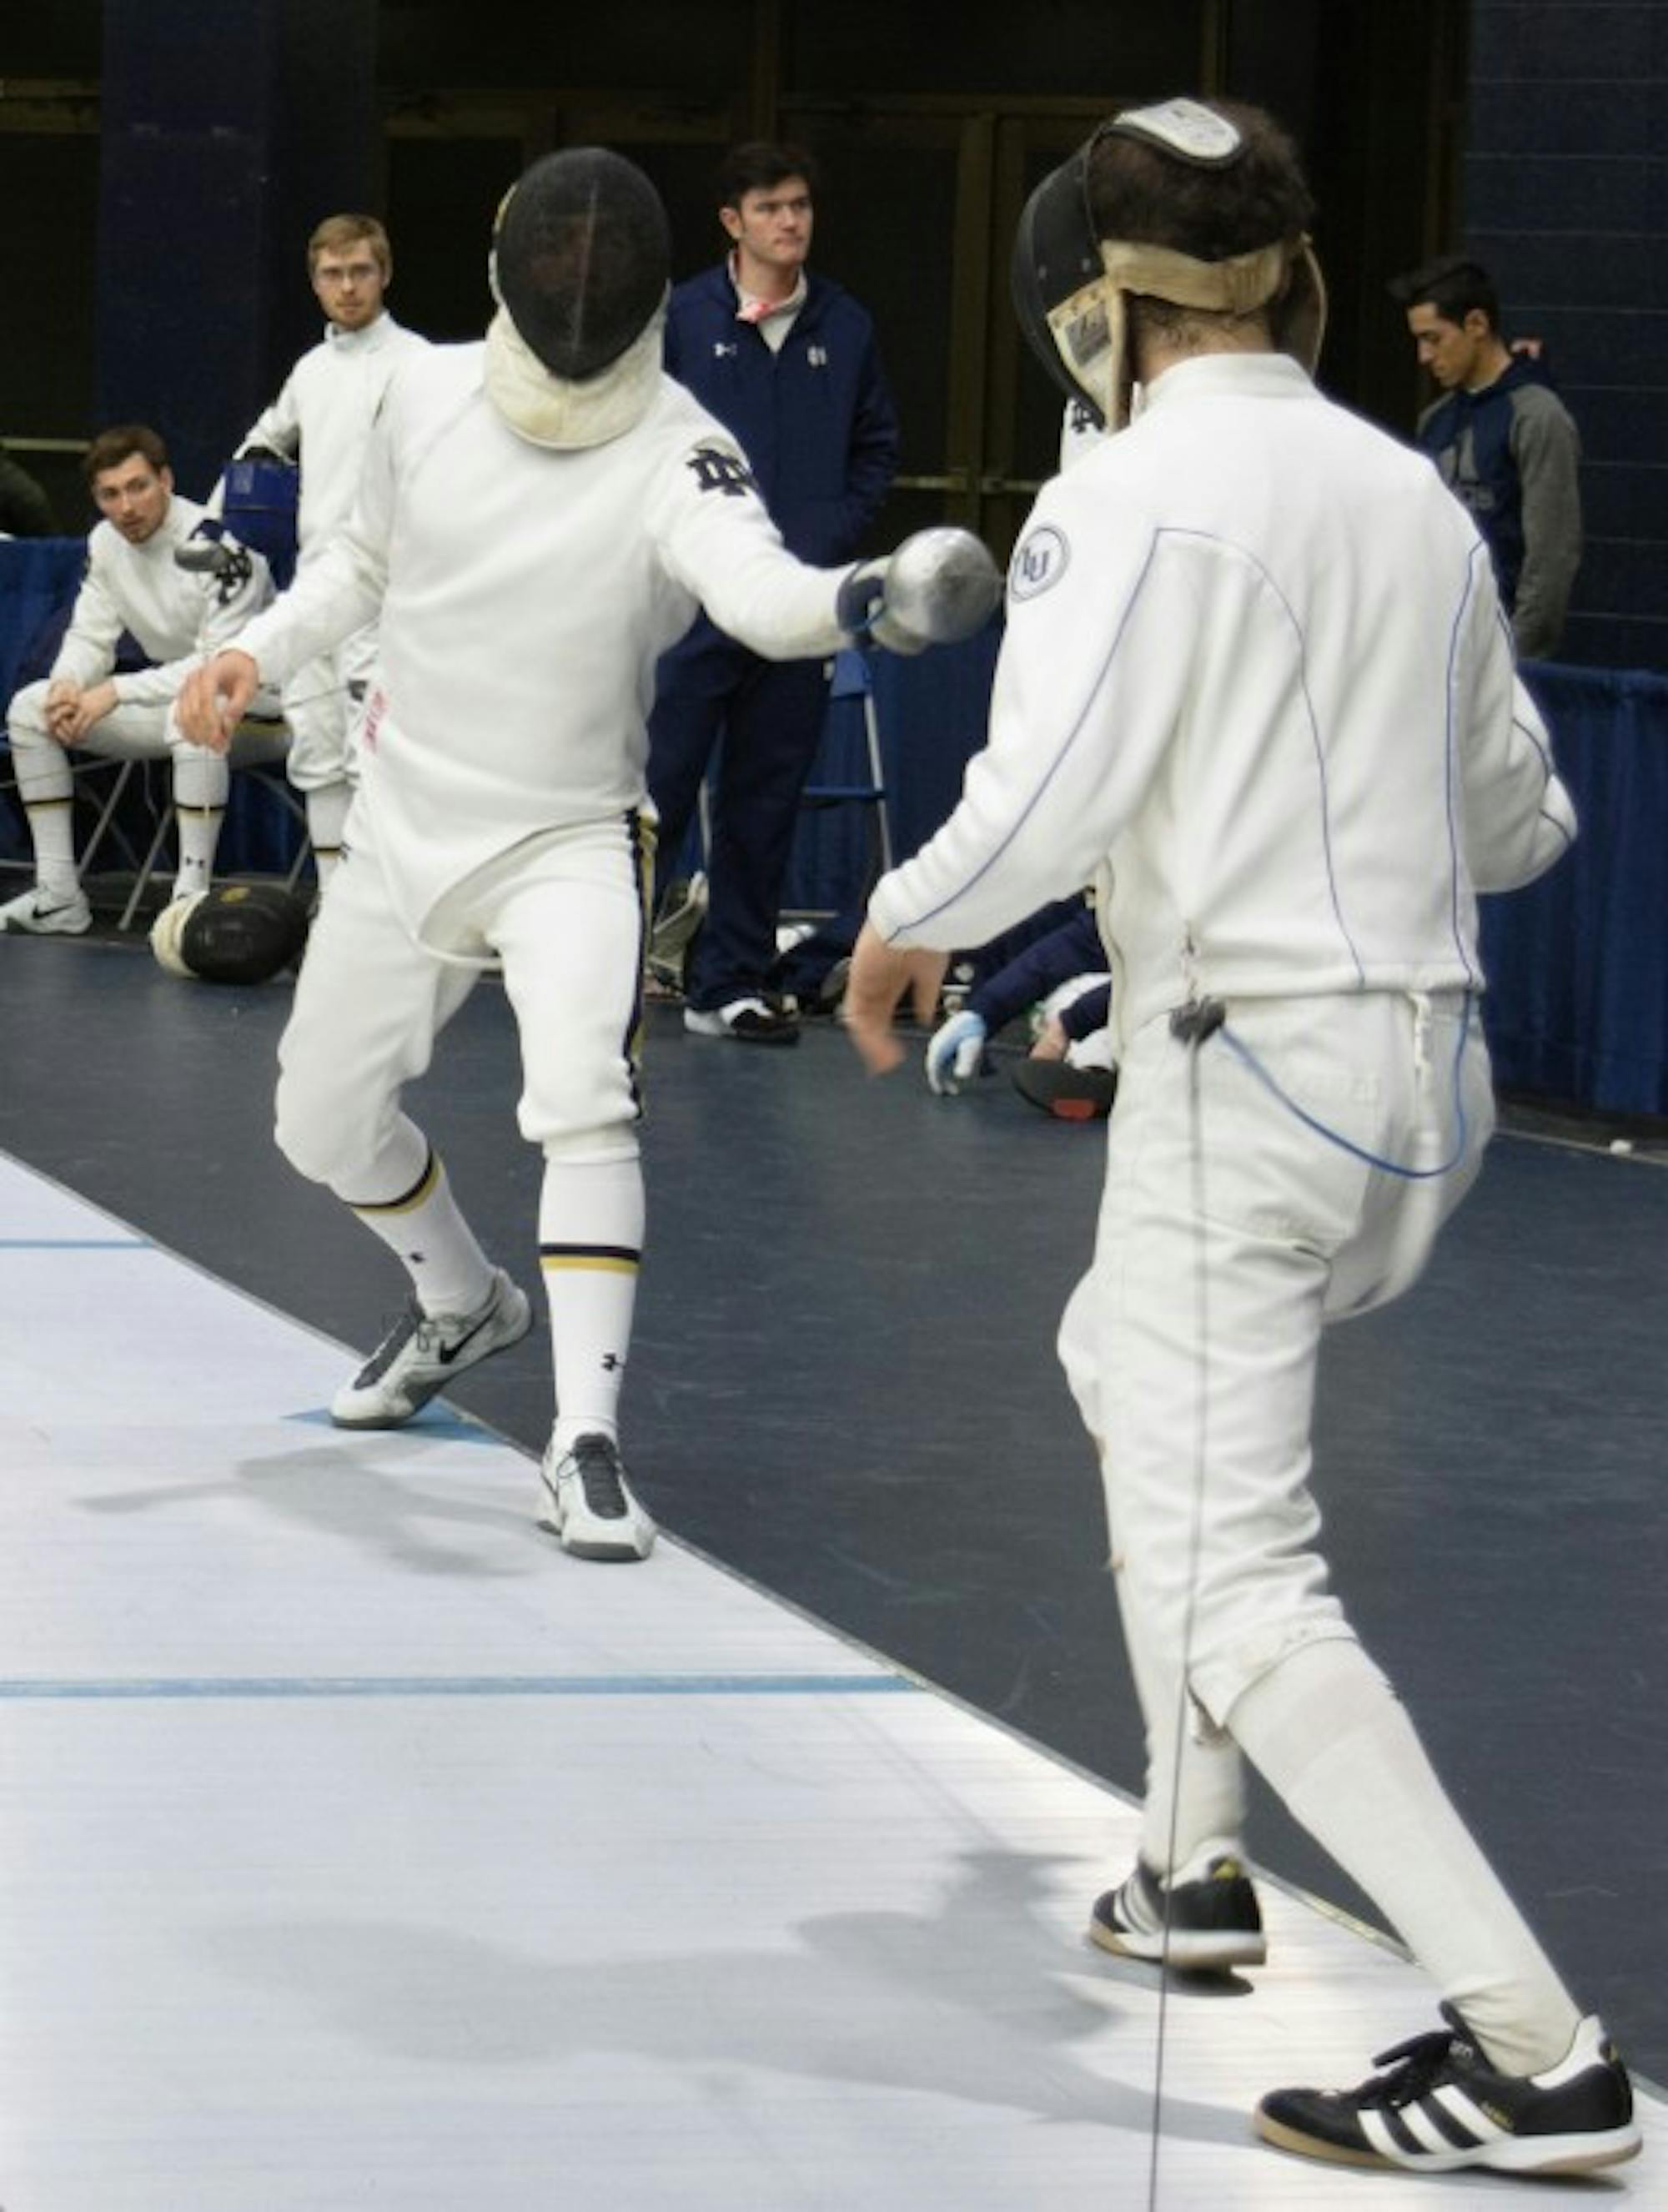 Junior epee Arthur Le Meur fences during the DeCicco Duels at the Castellan Family Fencing Center at Notre Dame on Jan. 16.